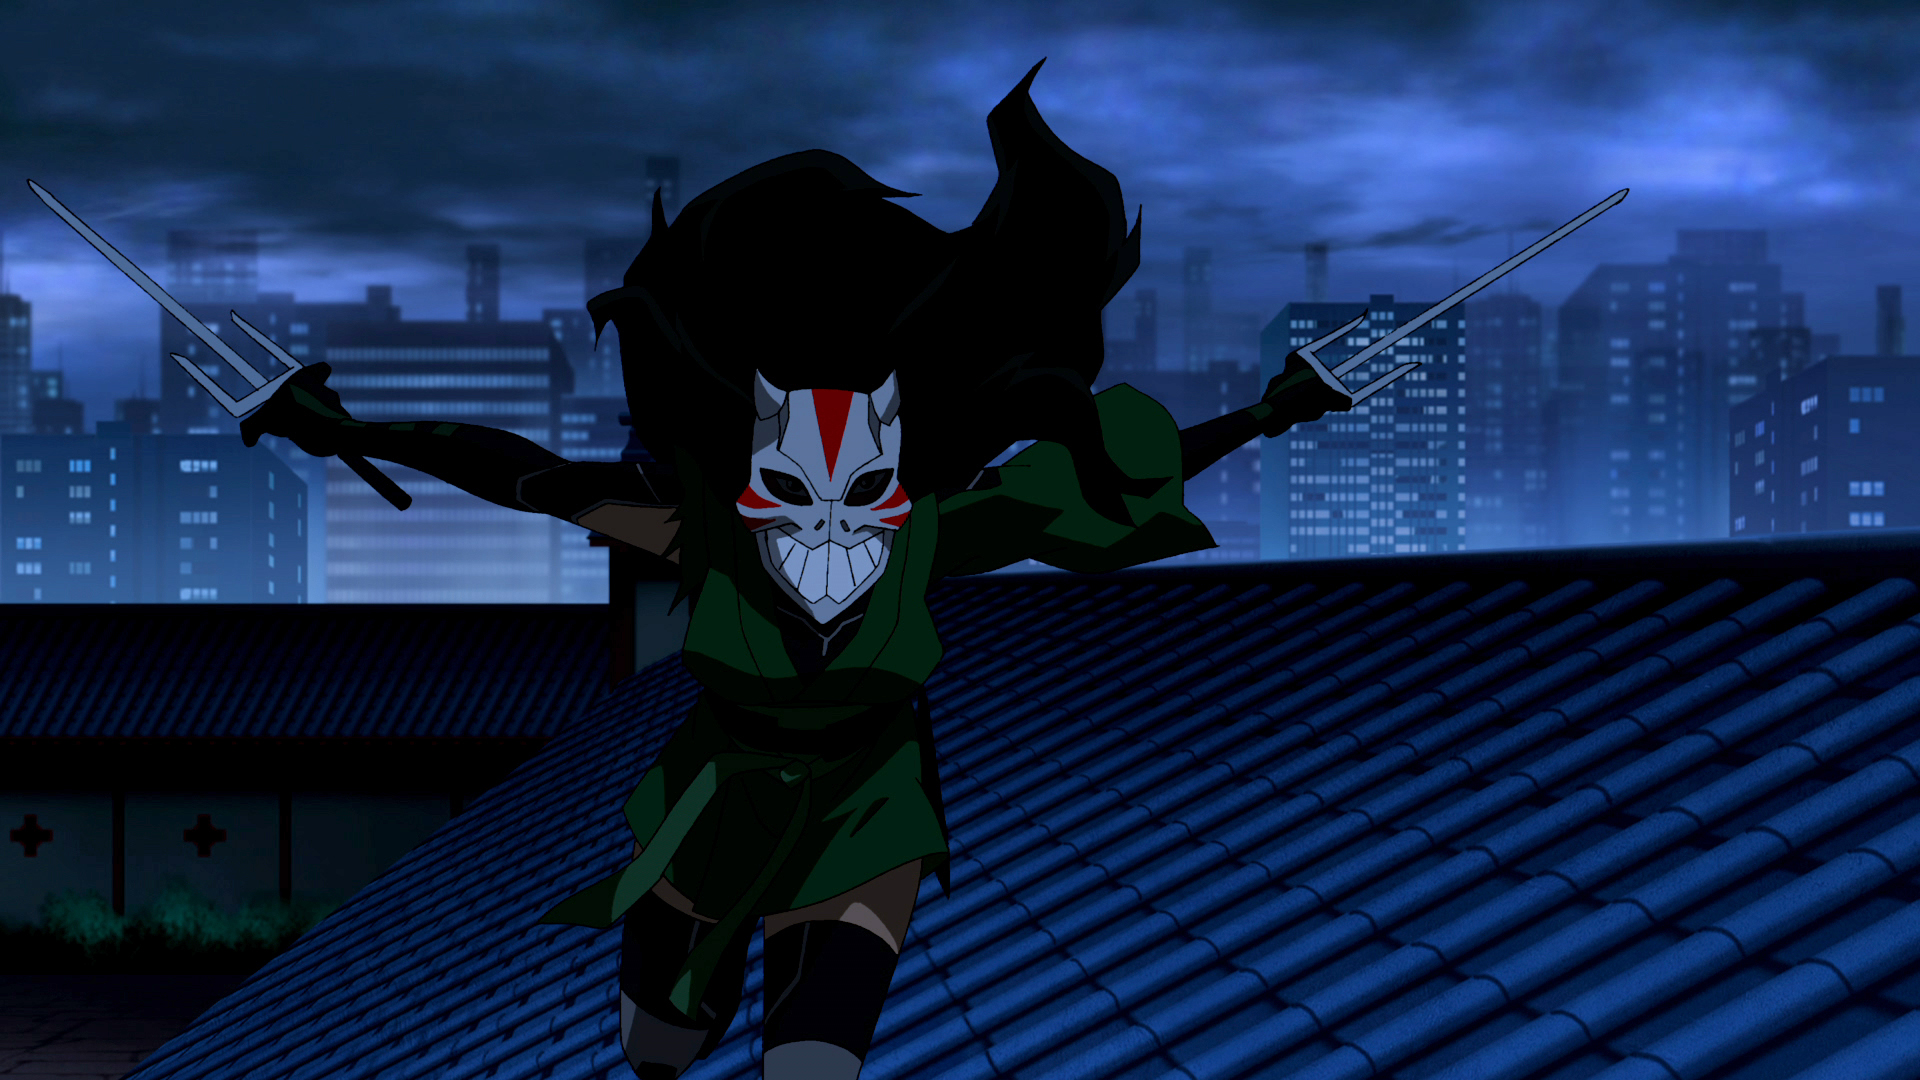 Cheshire DC Comics DC Comics Girl Night Rooftop Weapon Mask Long Hair Young Justice Thigh Boots Belt 1920x1080